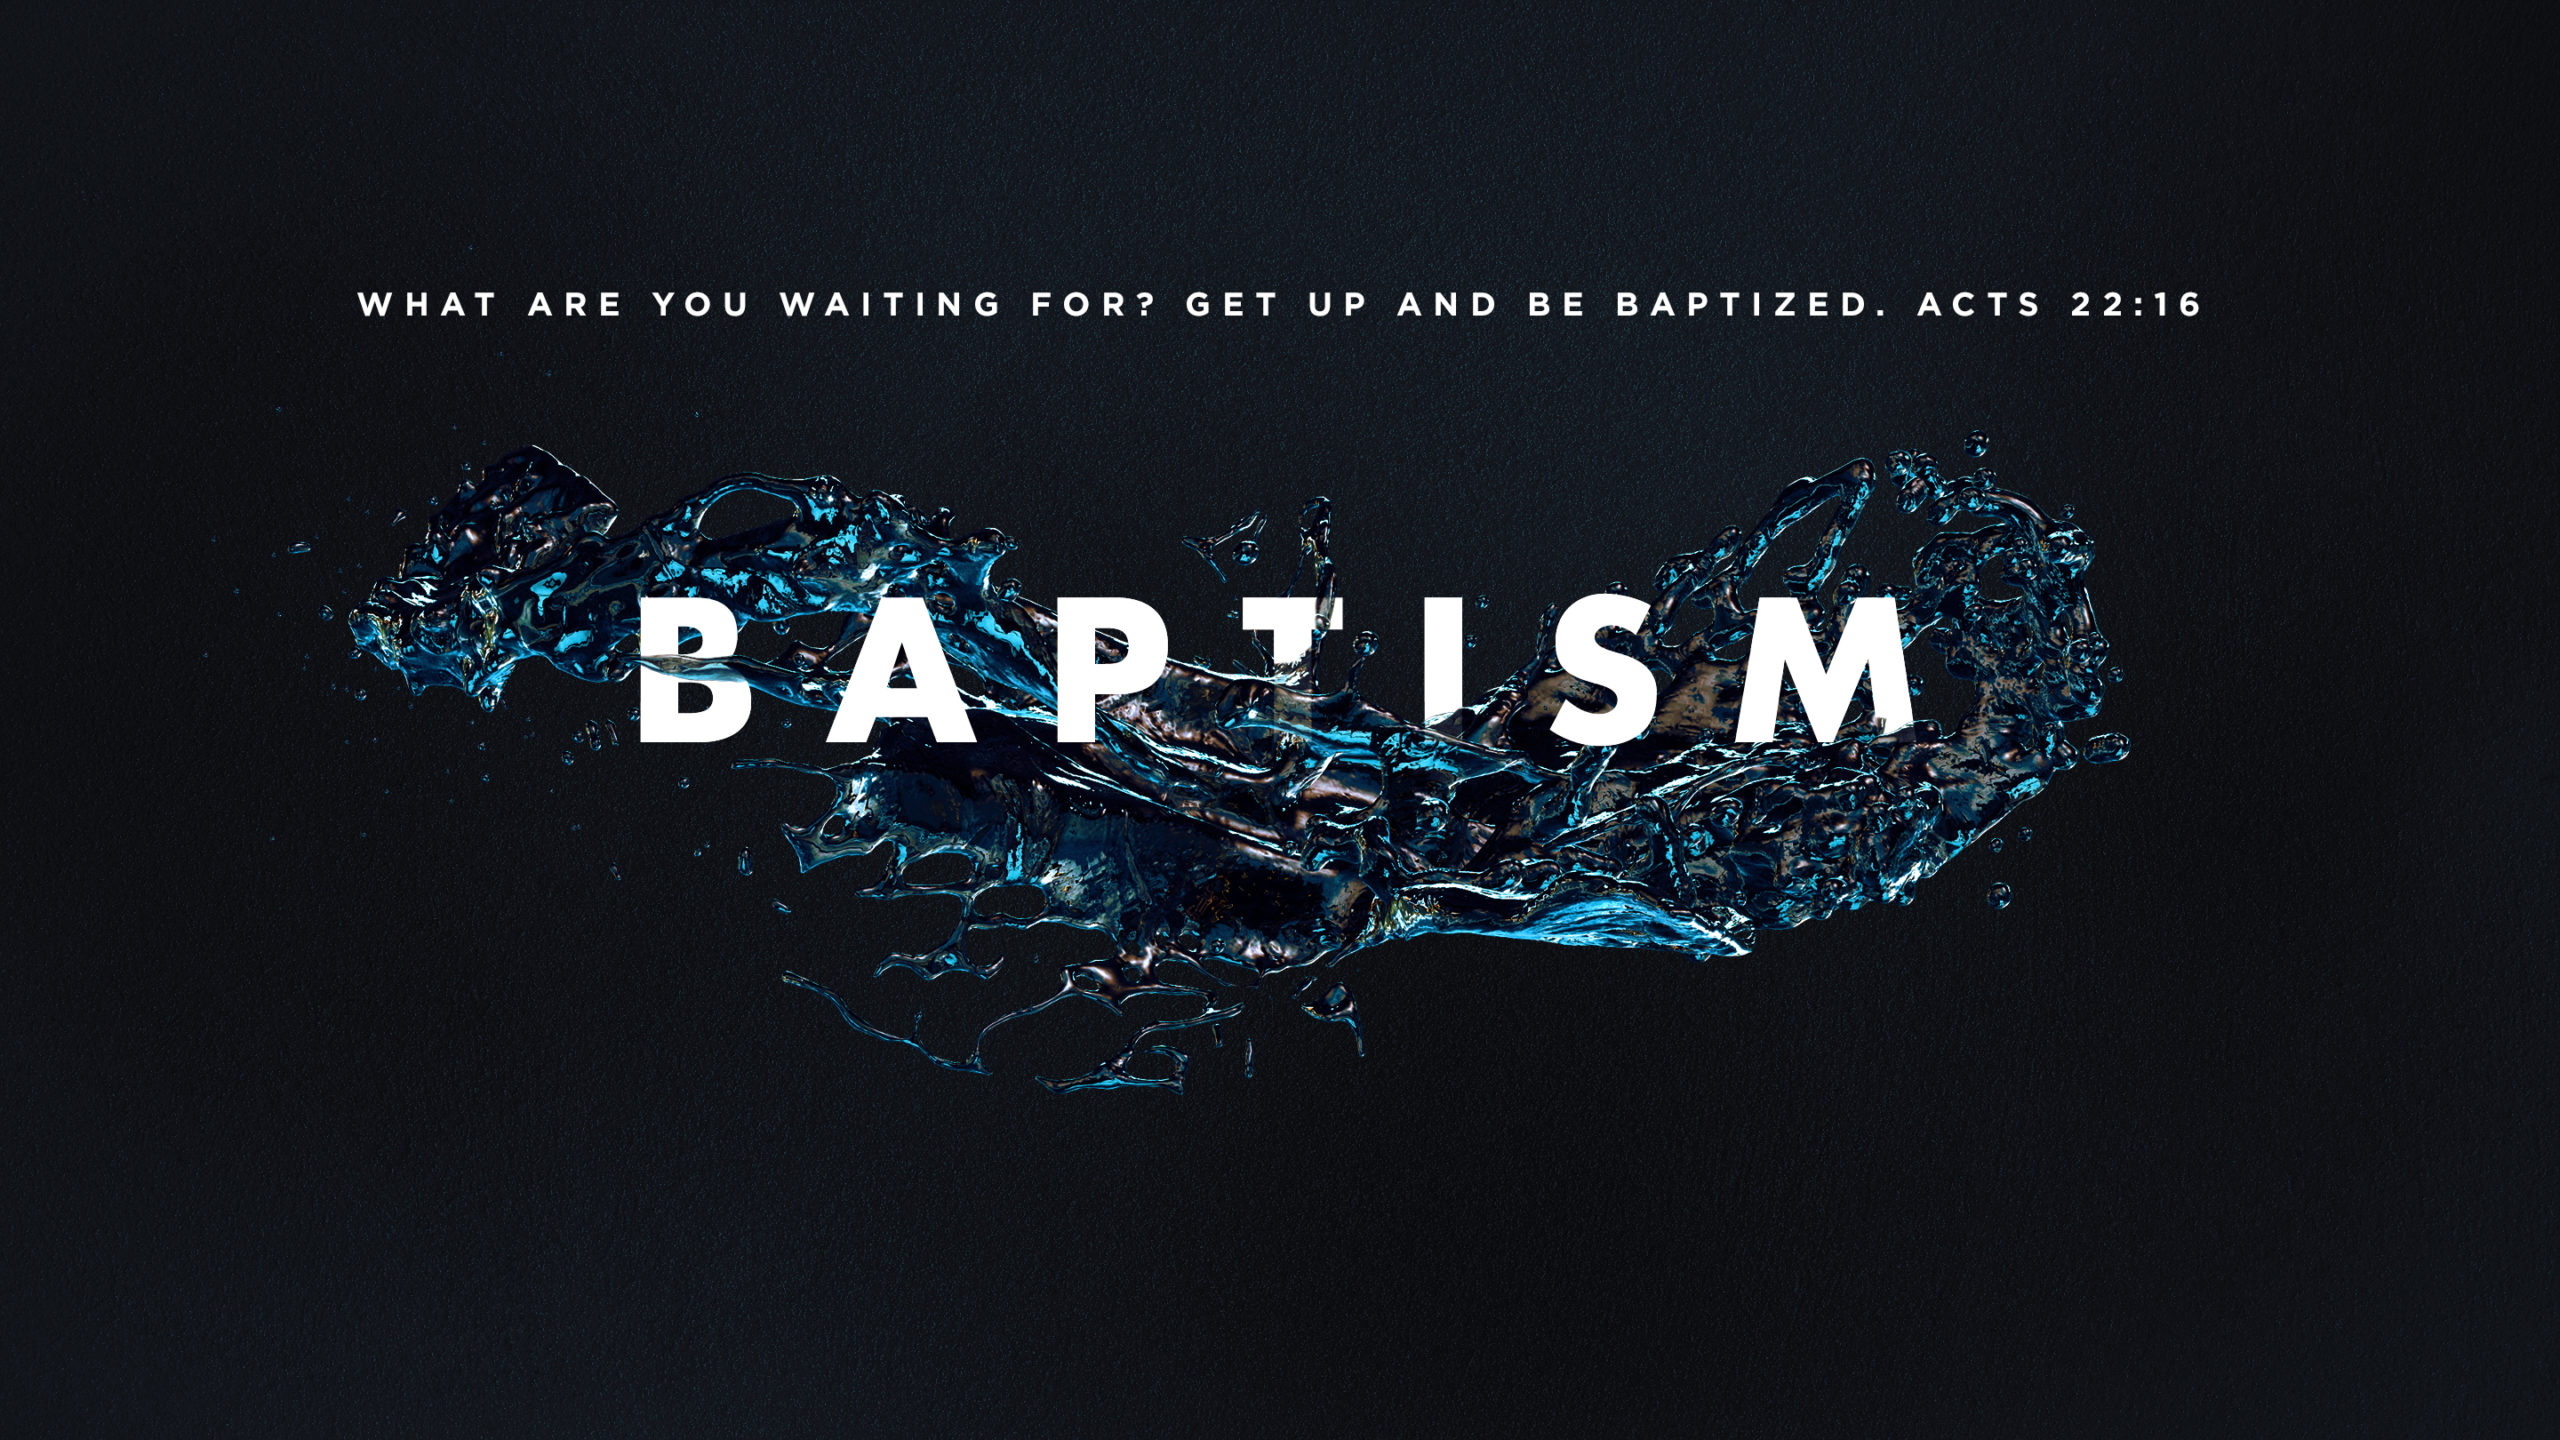 Baptism_Acts22webpage